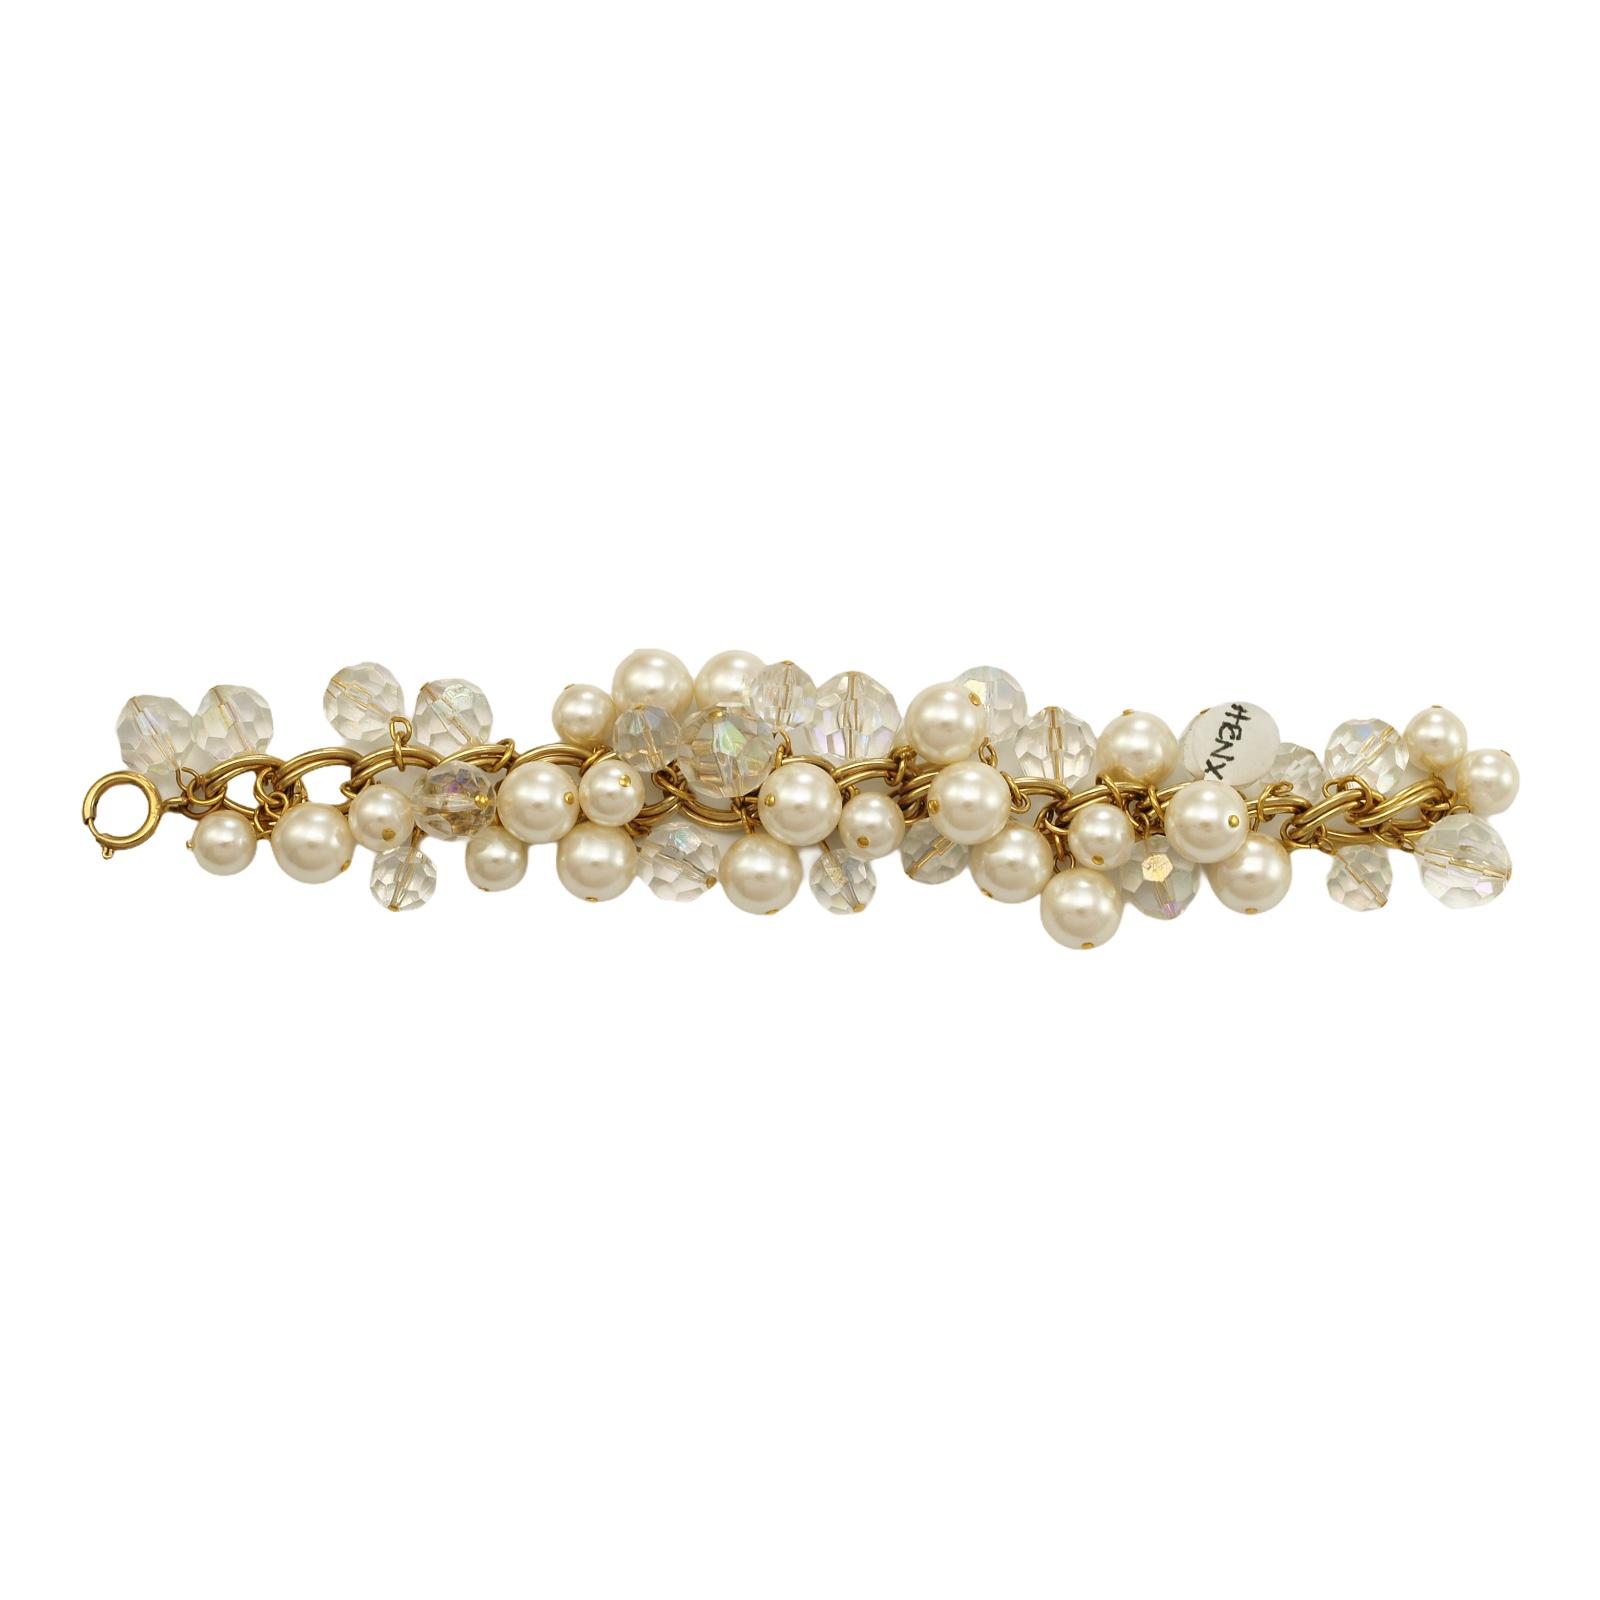 Wonderfully Chunky Vintage Faux Pearl and Crystal Collar and Bracelet Set -  The Jewelry Stylist